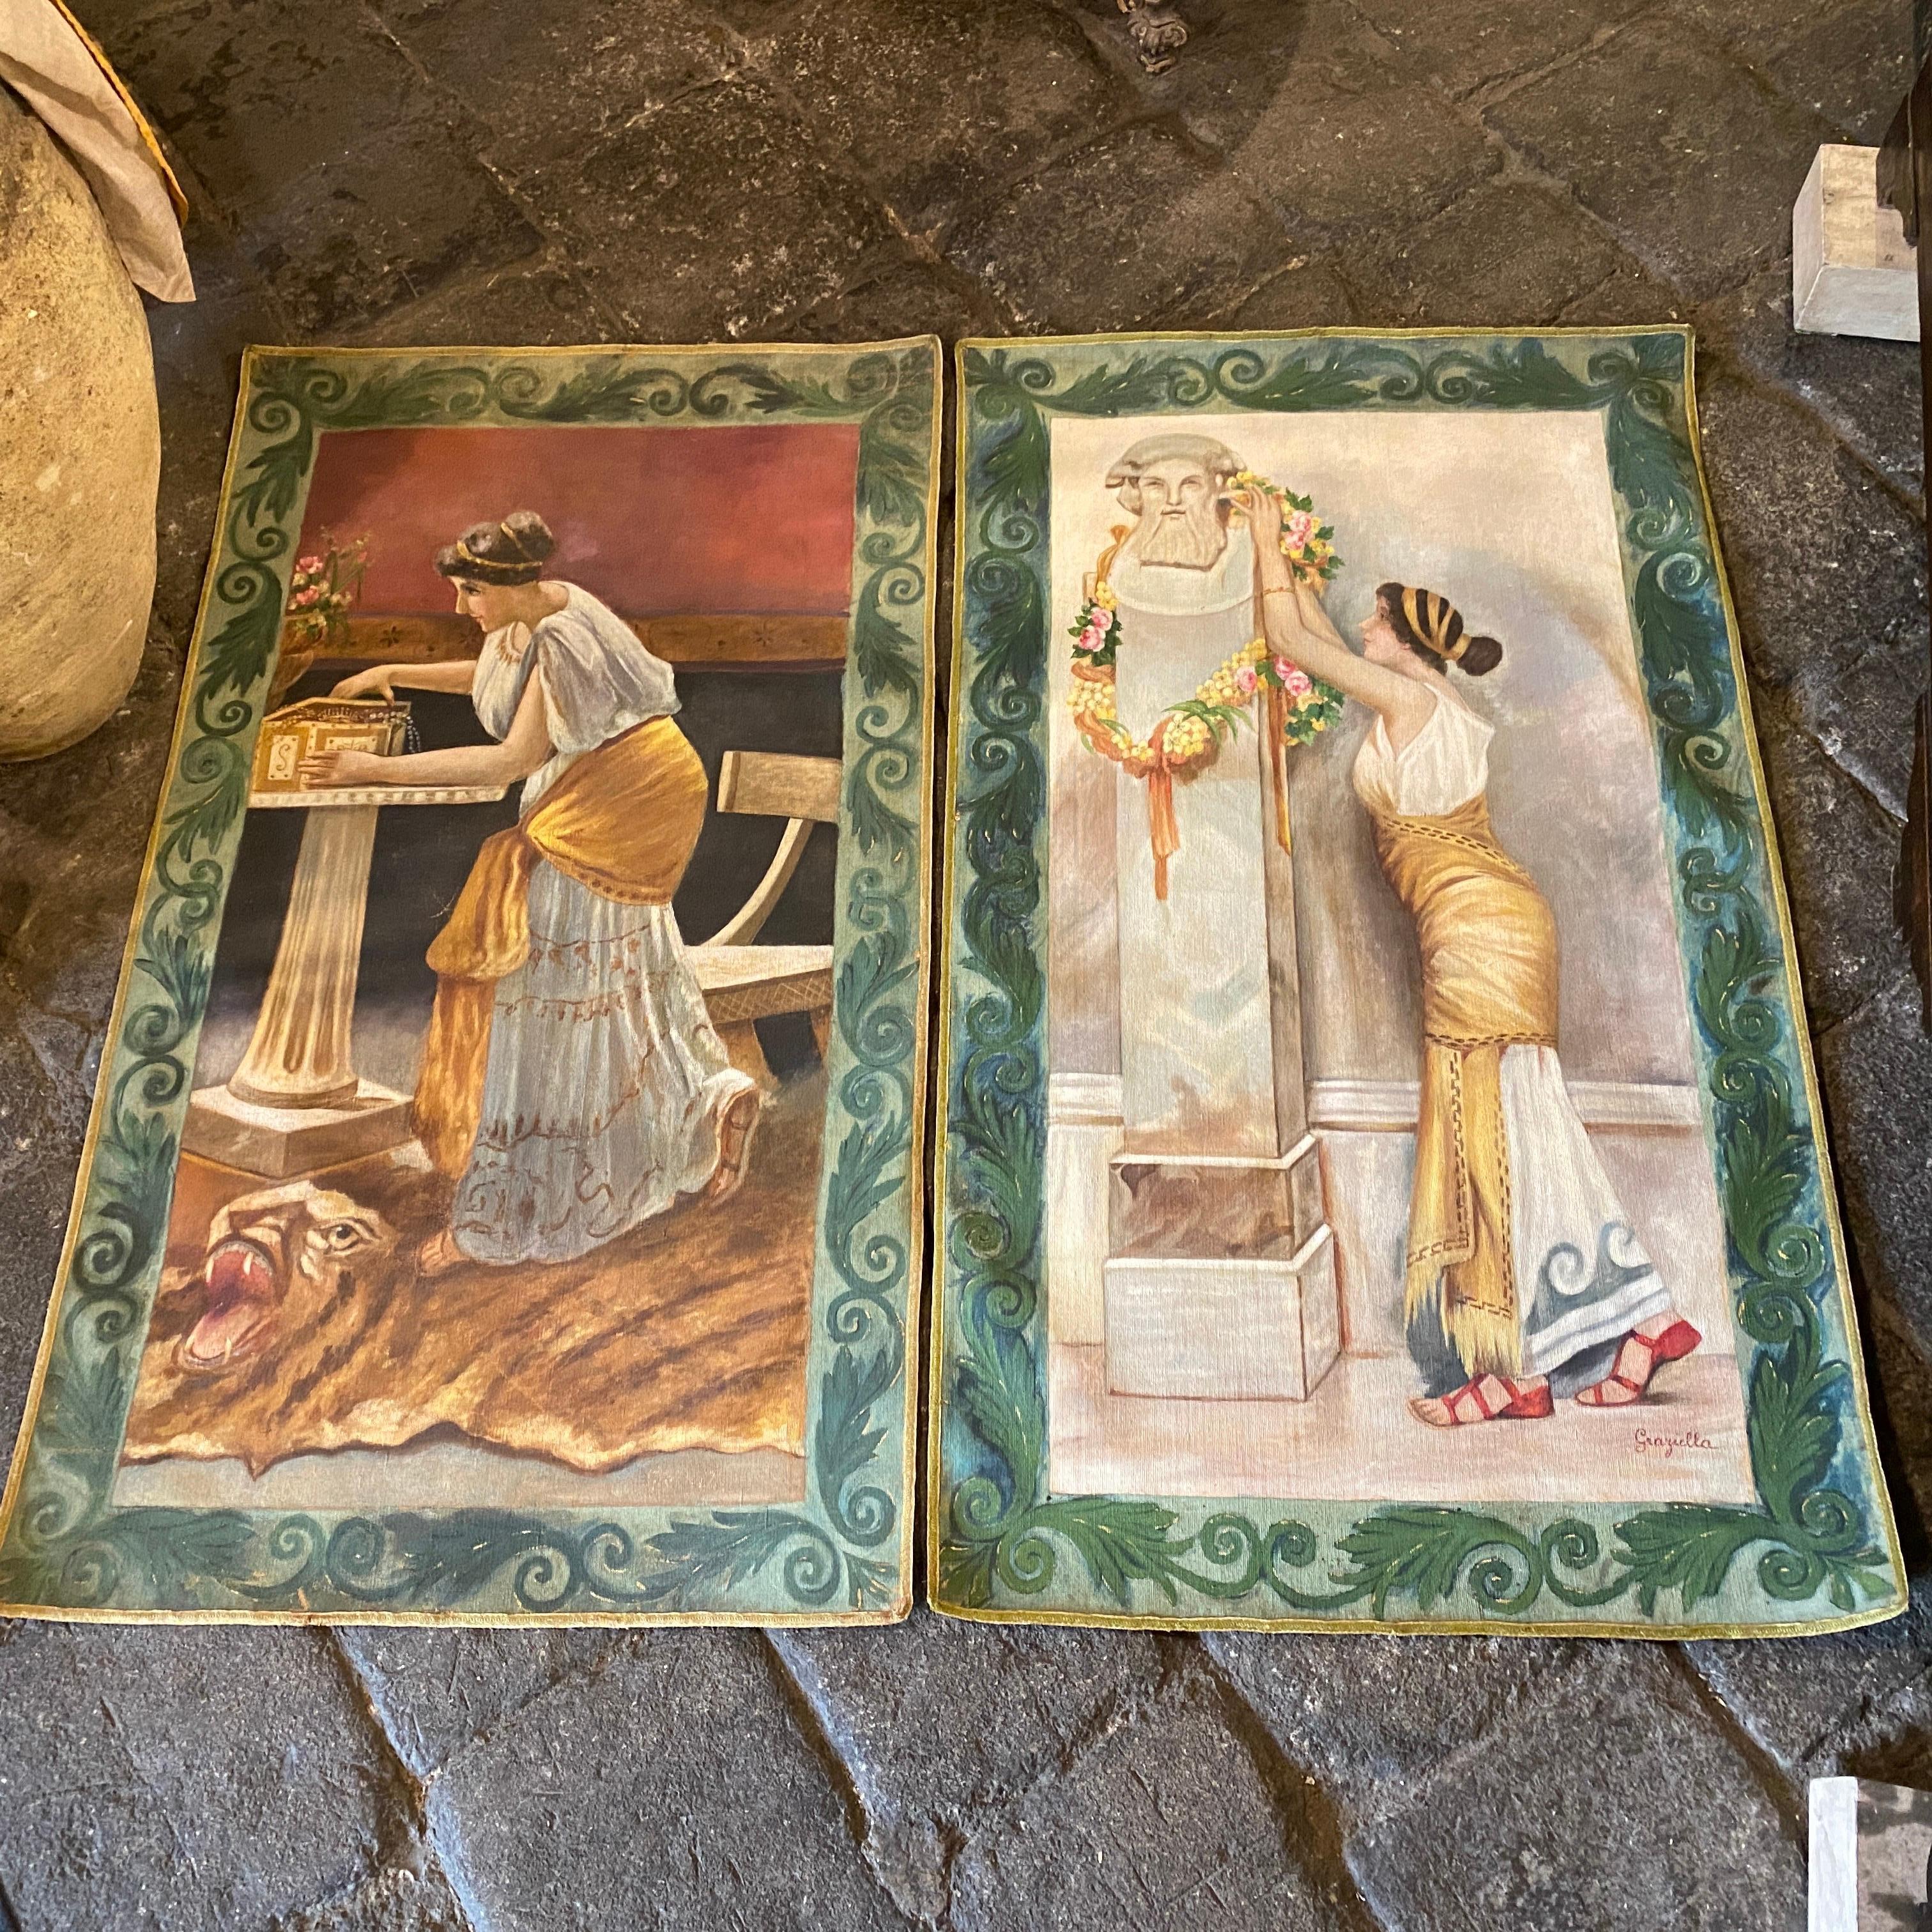 Rare pair of big art nouveau paintings on fabric hand-painted in Sicily in 1900, they are signed Graziella, paintings have neoclassical motifs. They are in very good conditions considering age.